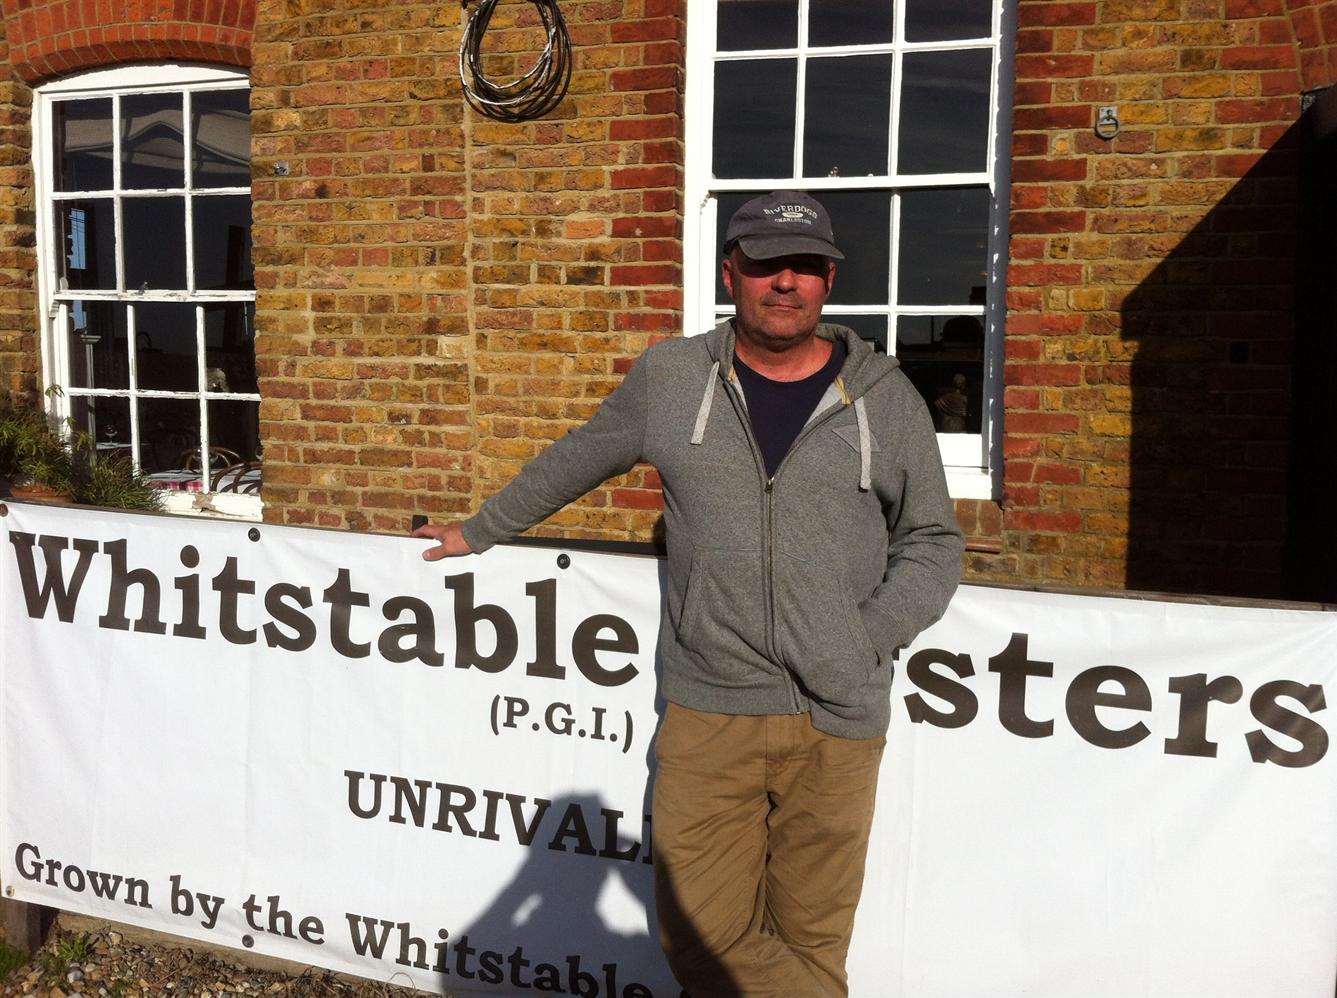 Richard Green from the Whitstable Oyster Company